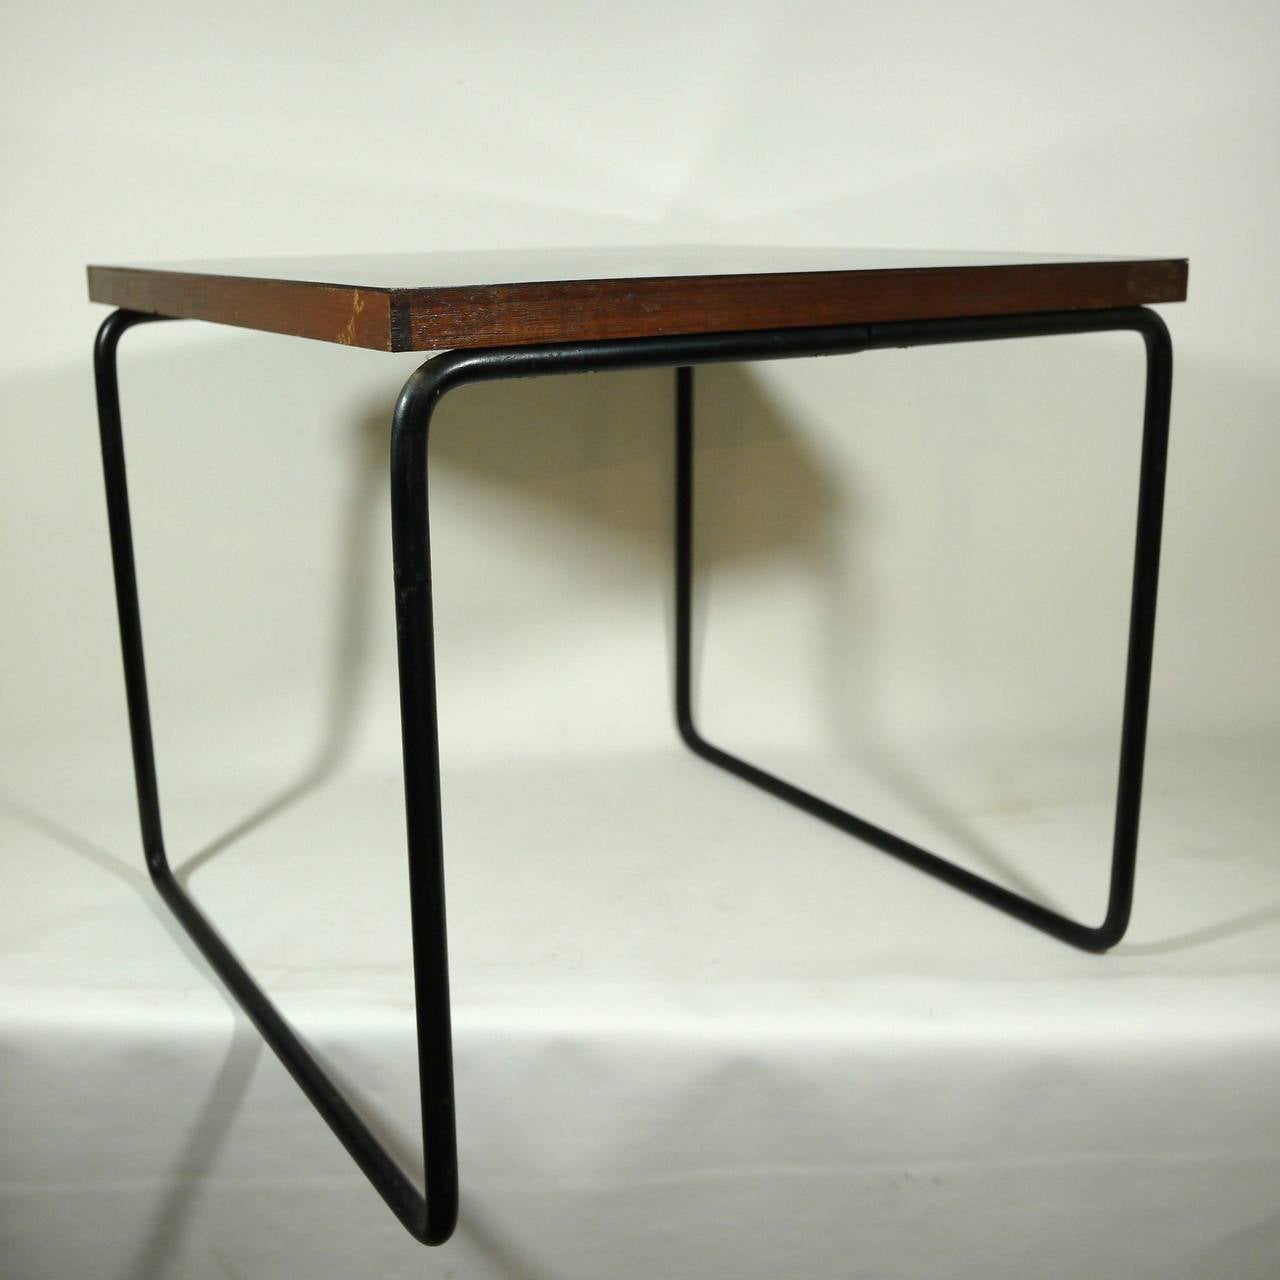 Side table by Pierre Guariche for Steiner Editor. Black laquered metal base with black plated wood top.